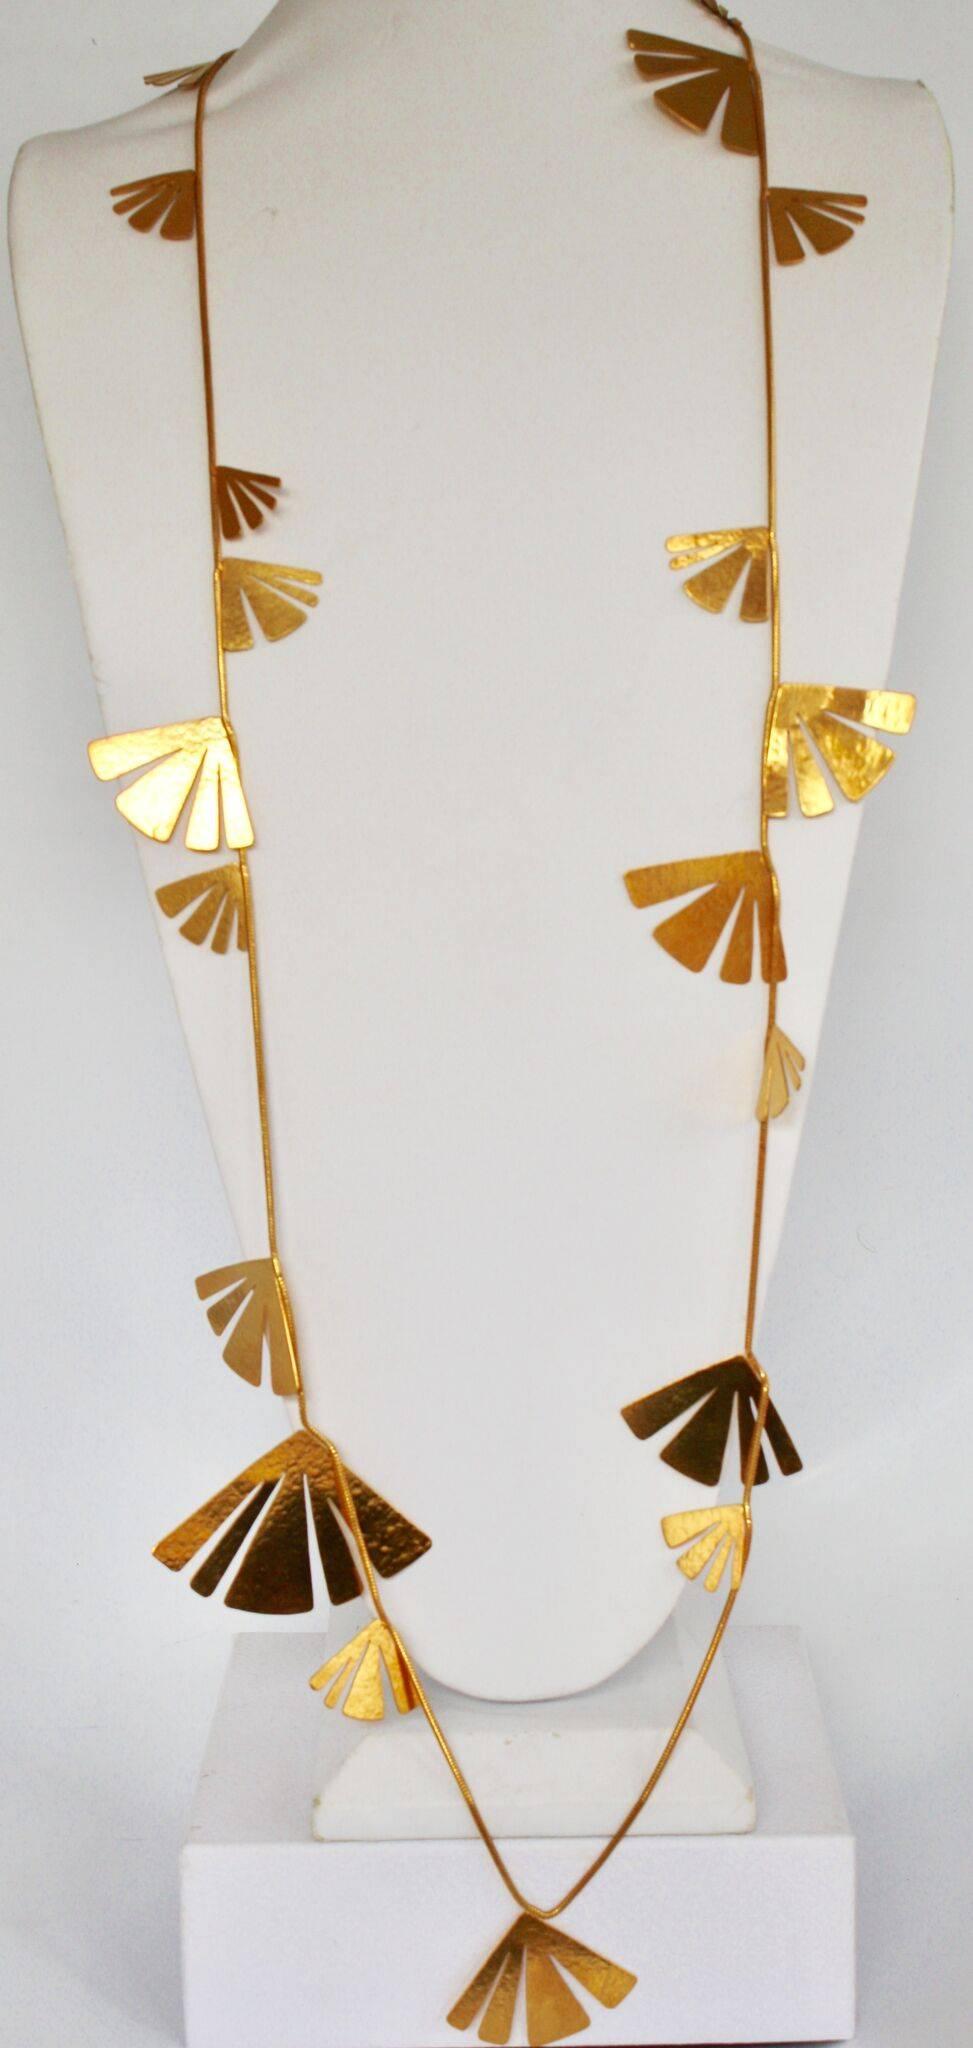 This designer is no longer producing jewelry, thus these pieces are now collectors items! Gilded brass sautoir necklace with fan motif from Herve van der Straeten. 

 Largest fan is 2.5”, smallest .5”